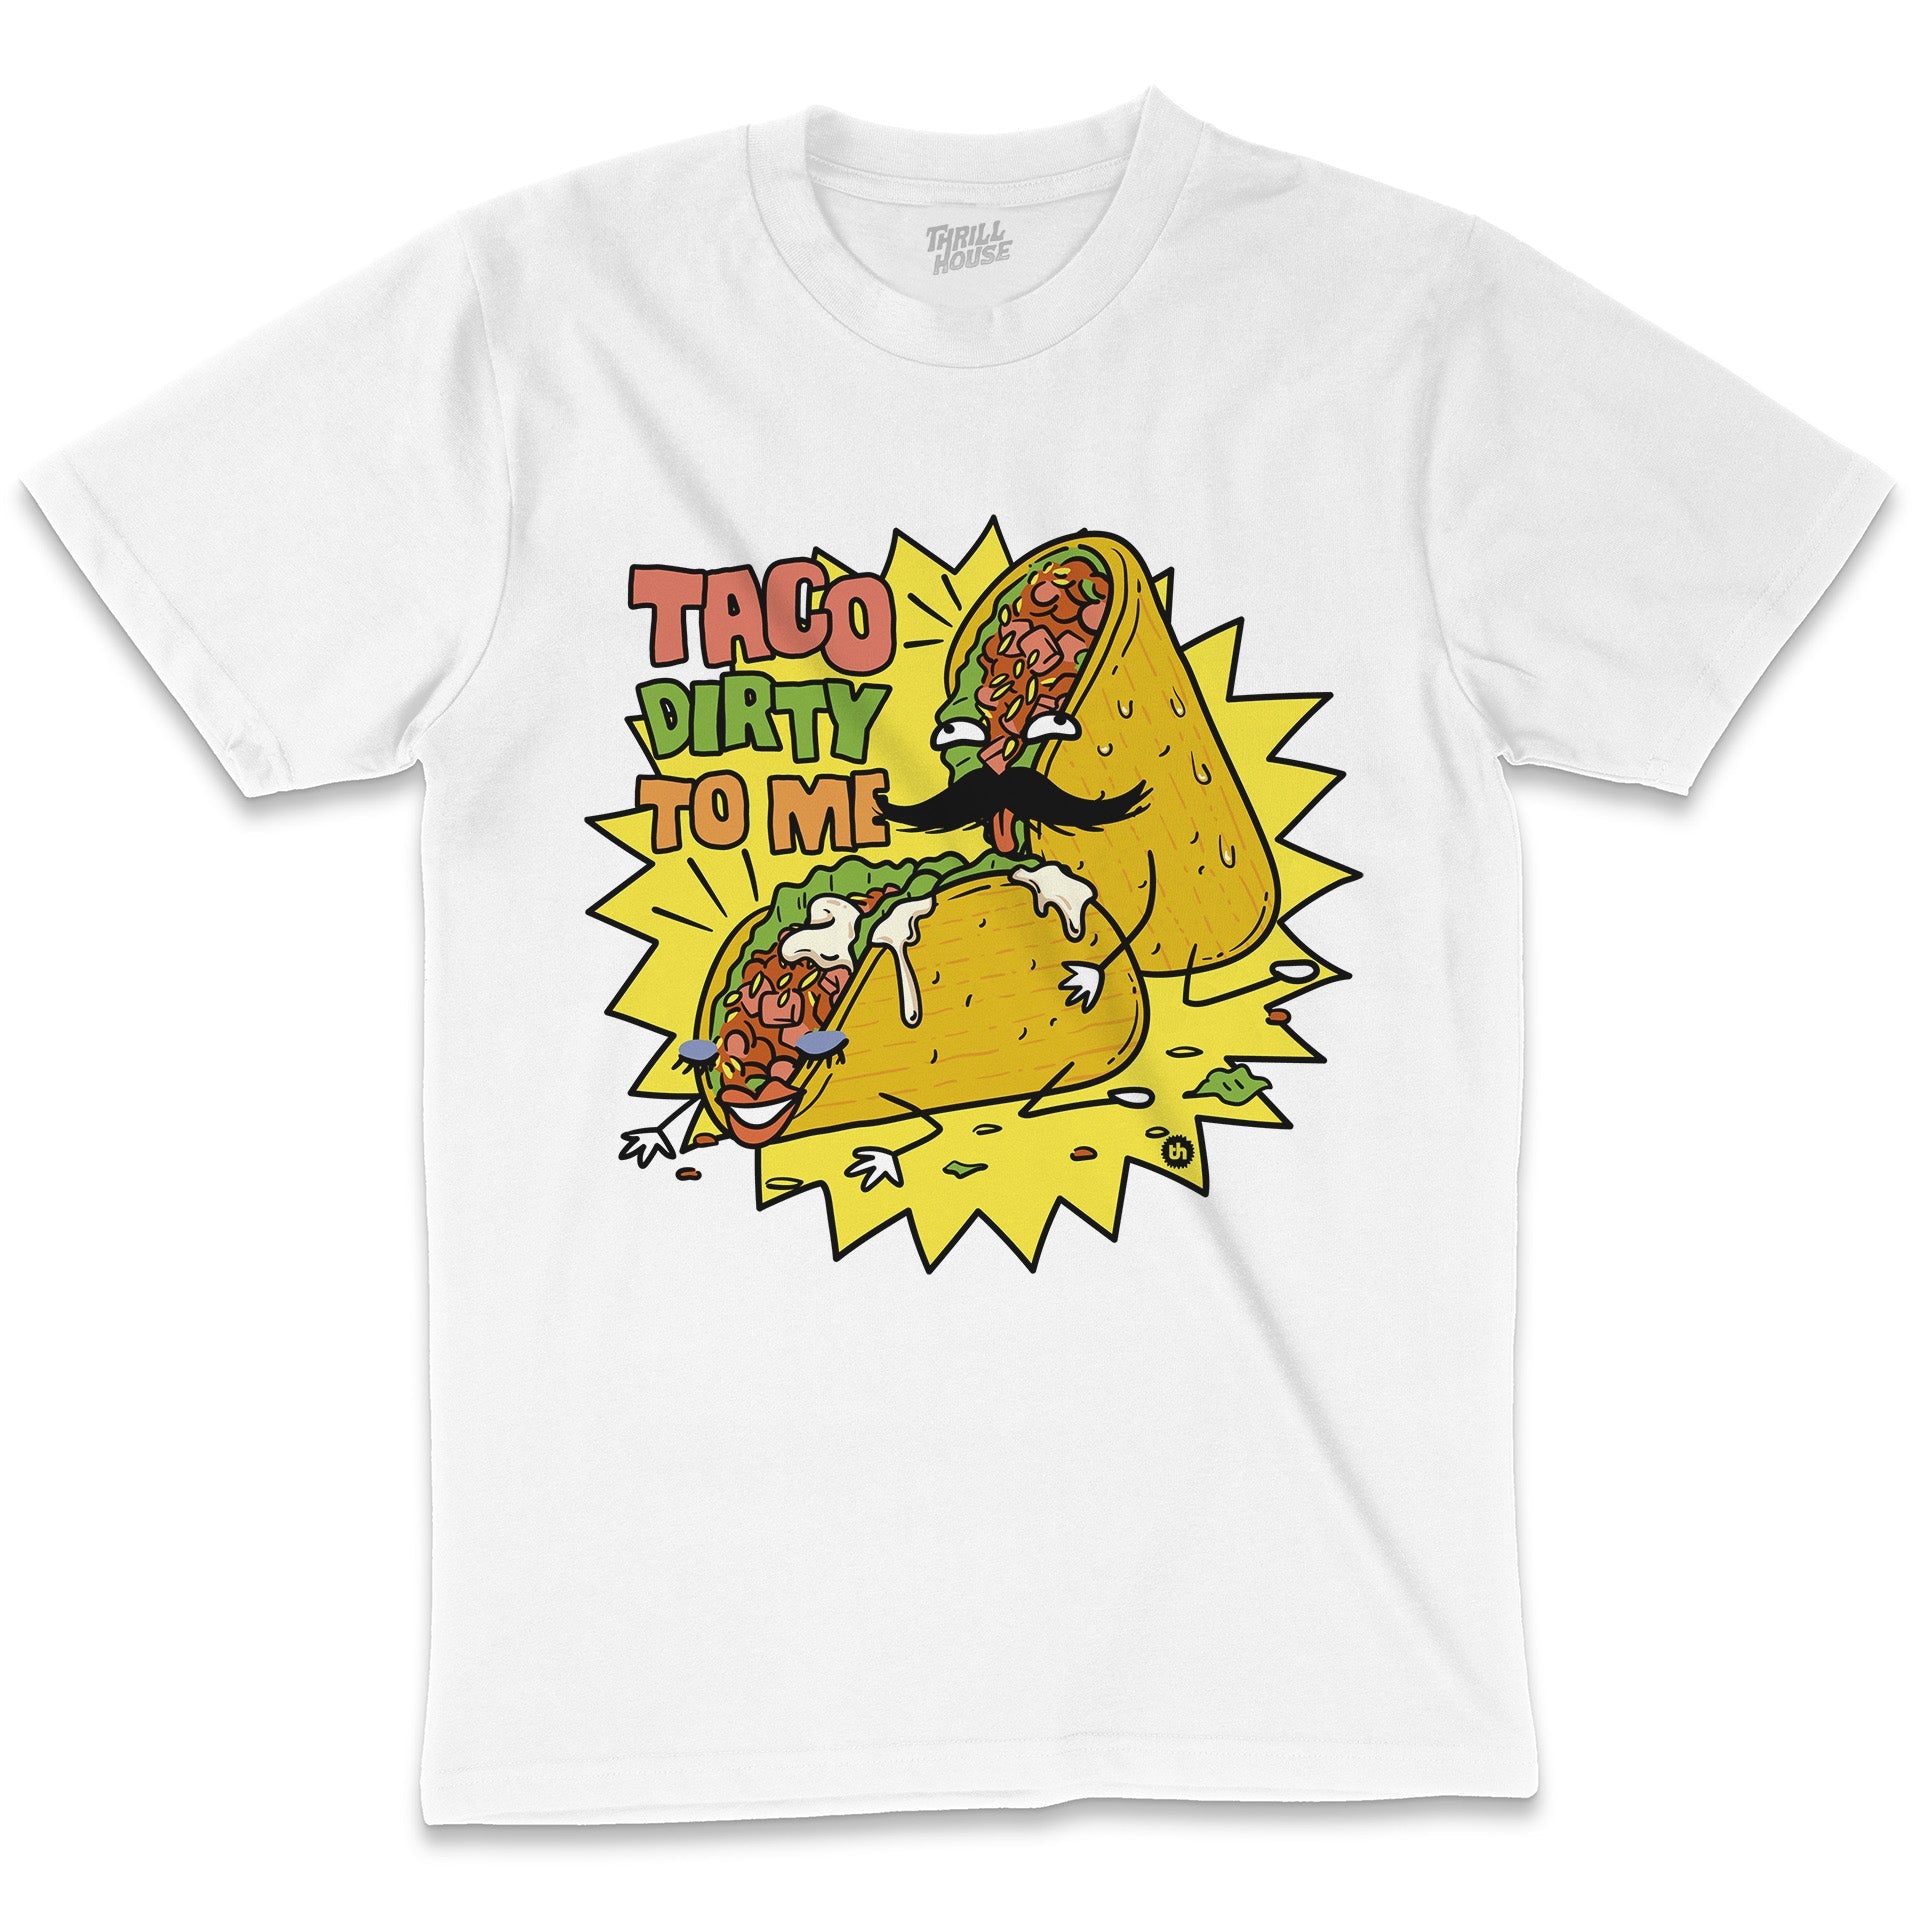 Taco Dirty to Me Taco Sex Slogan Funny Rude Offensive Food Parody Pun Cotton T-Shirt